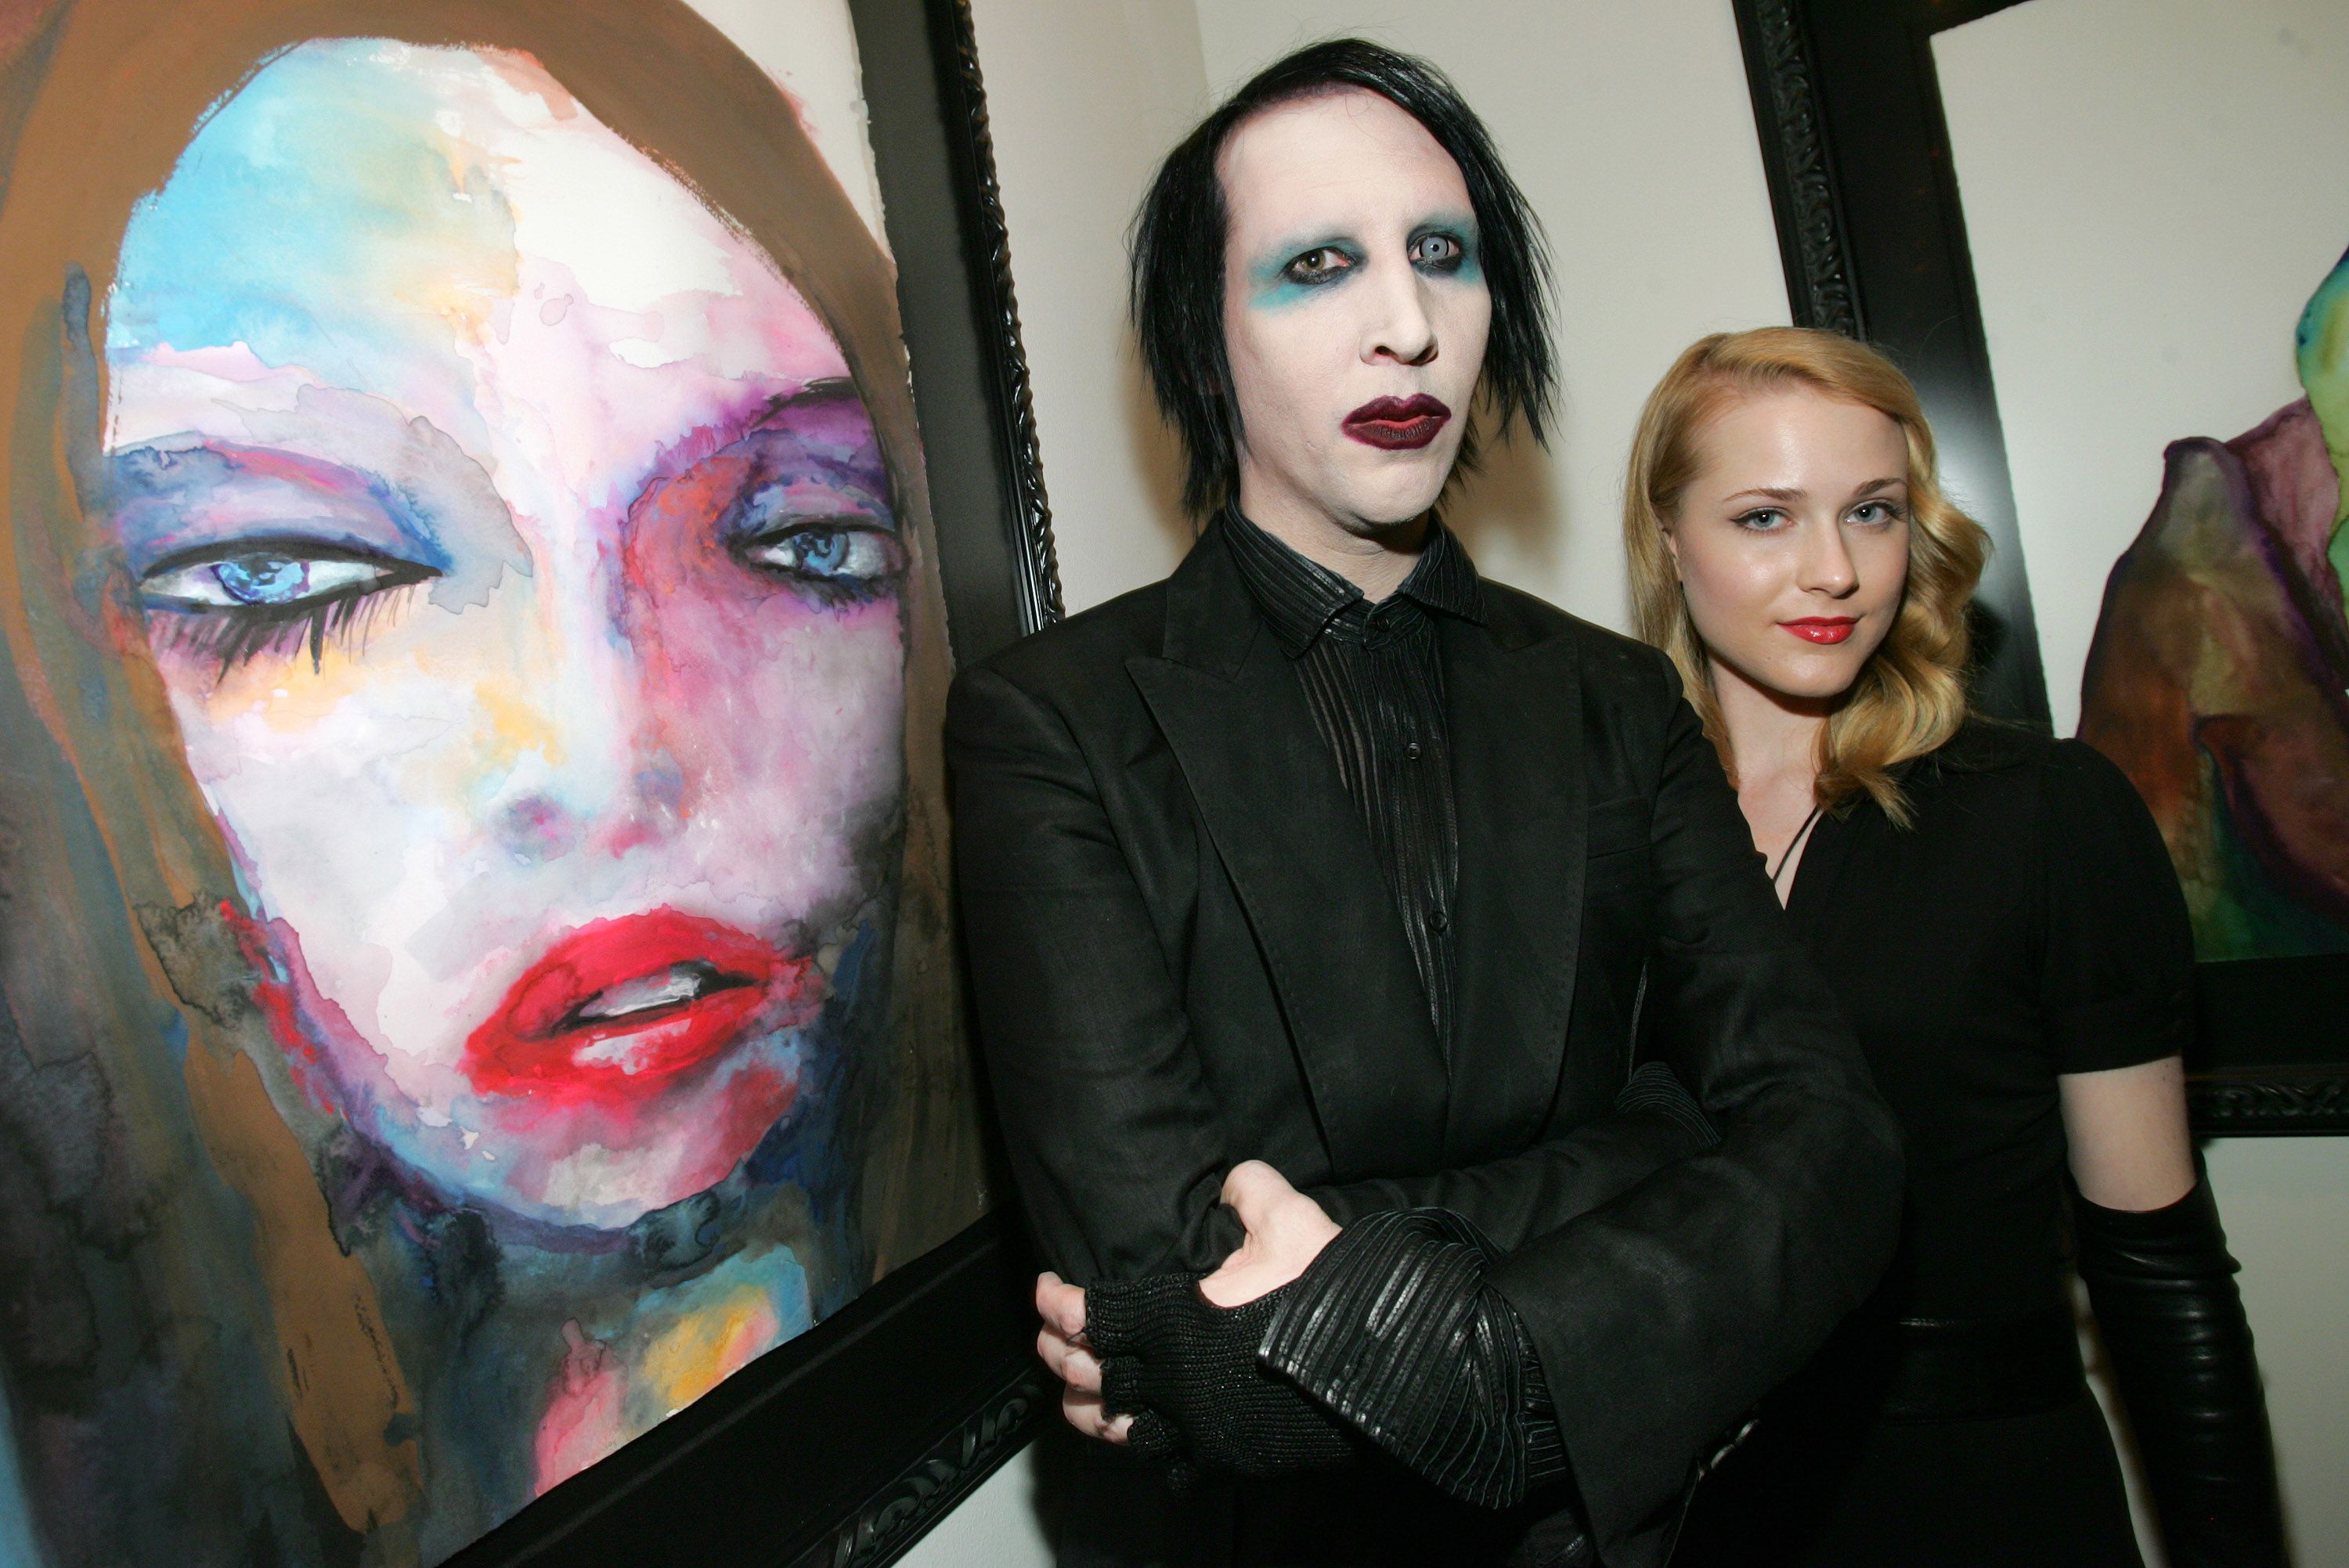 Marilyn Manson and Evan Rachel Wood circa 2007 | Source: Getty Images